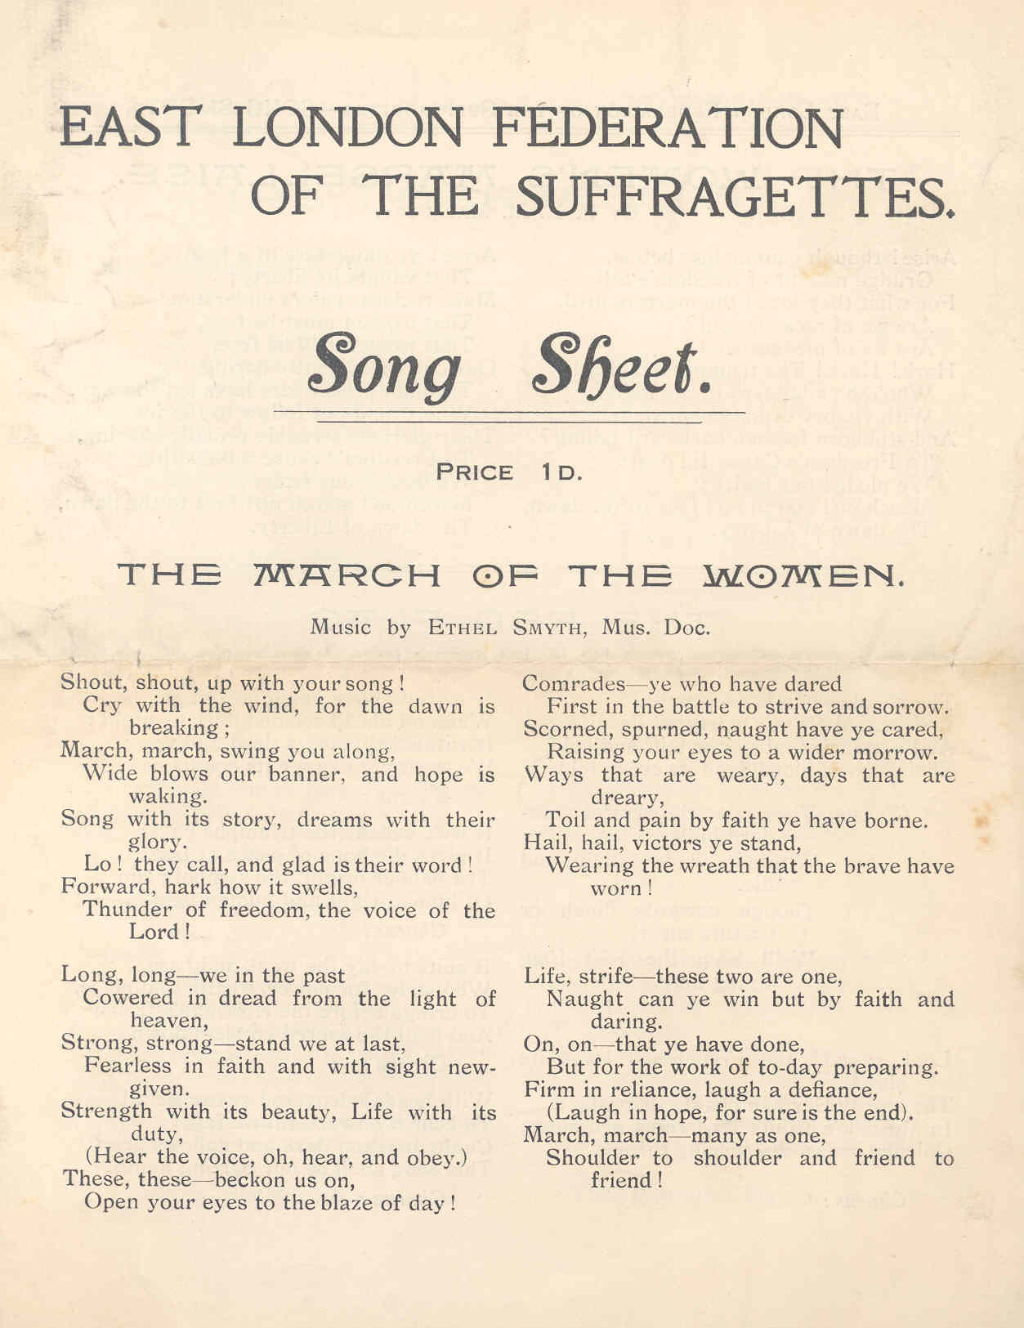 Song sheet sold by the East London Federation of the Suffragettes, undated